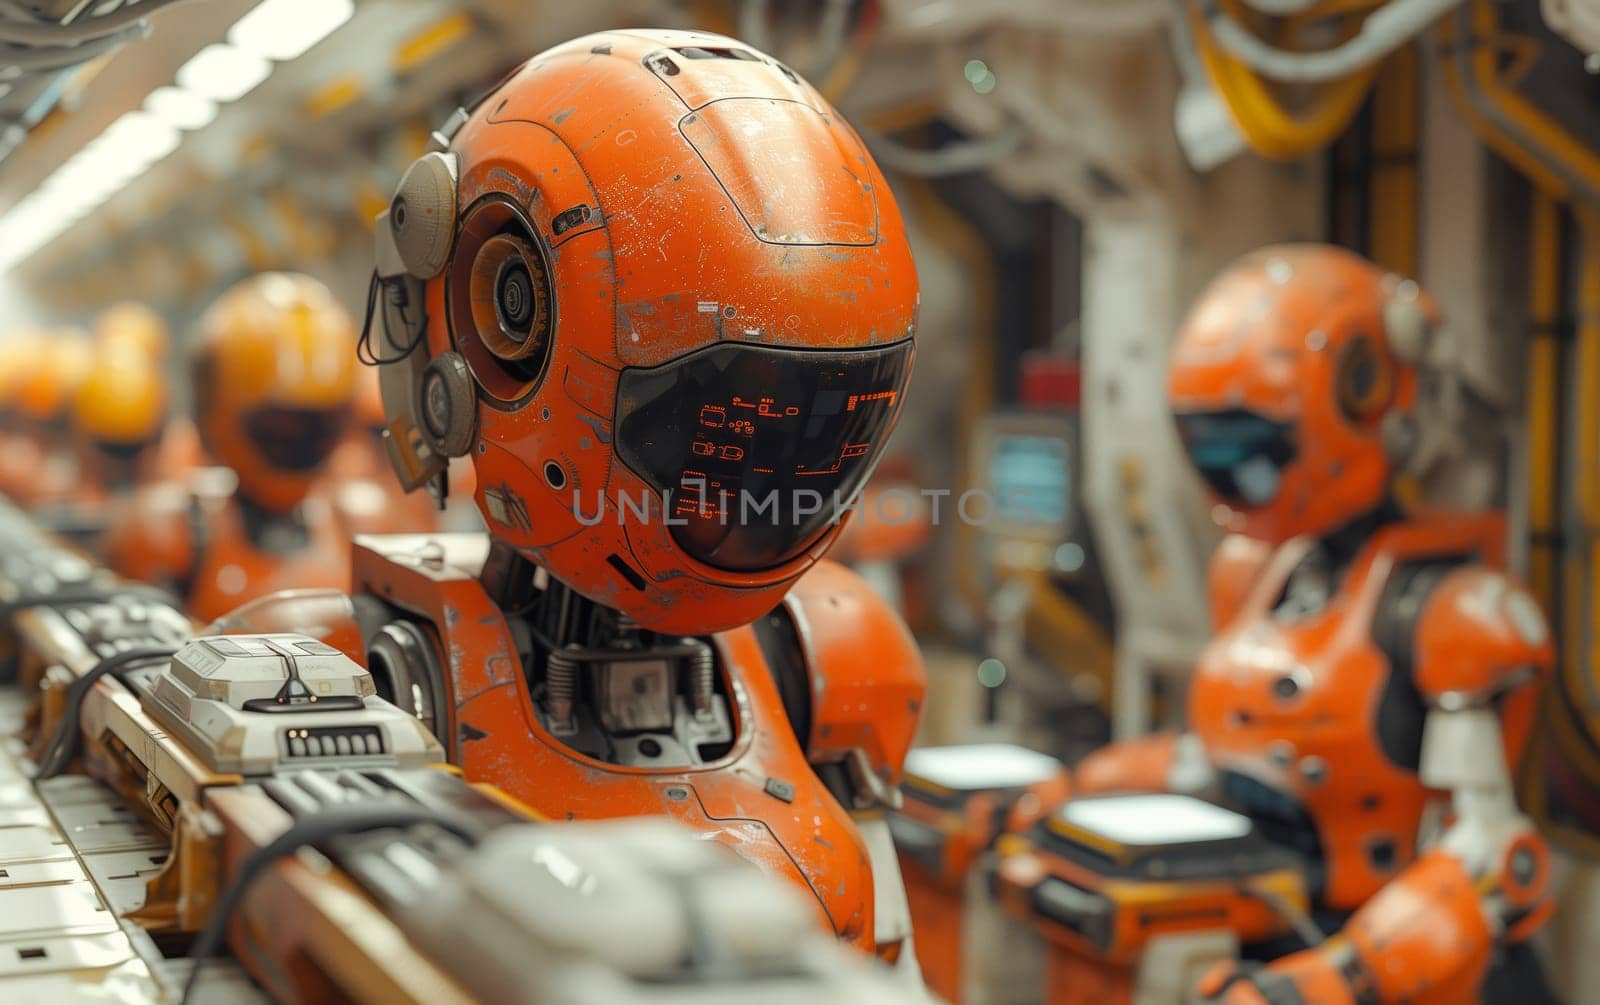 Robots in a factory are assembling sports gear and helmets on a conveyor belt by richwolf